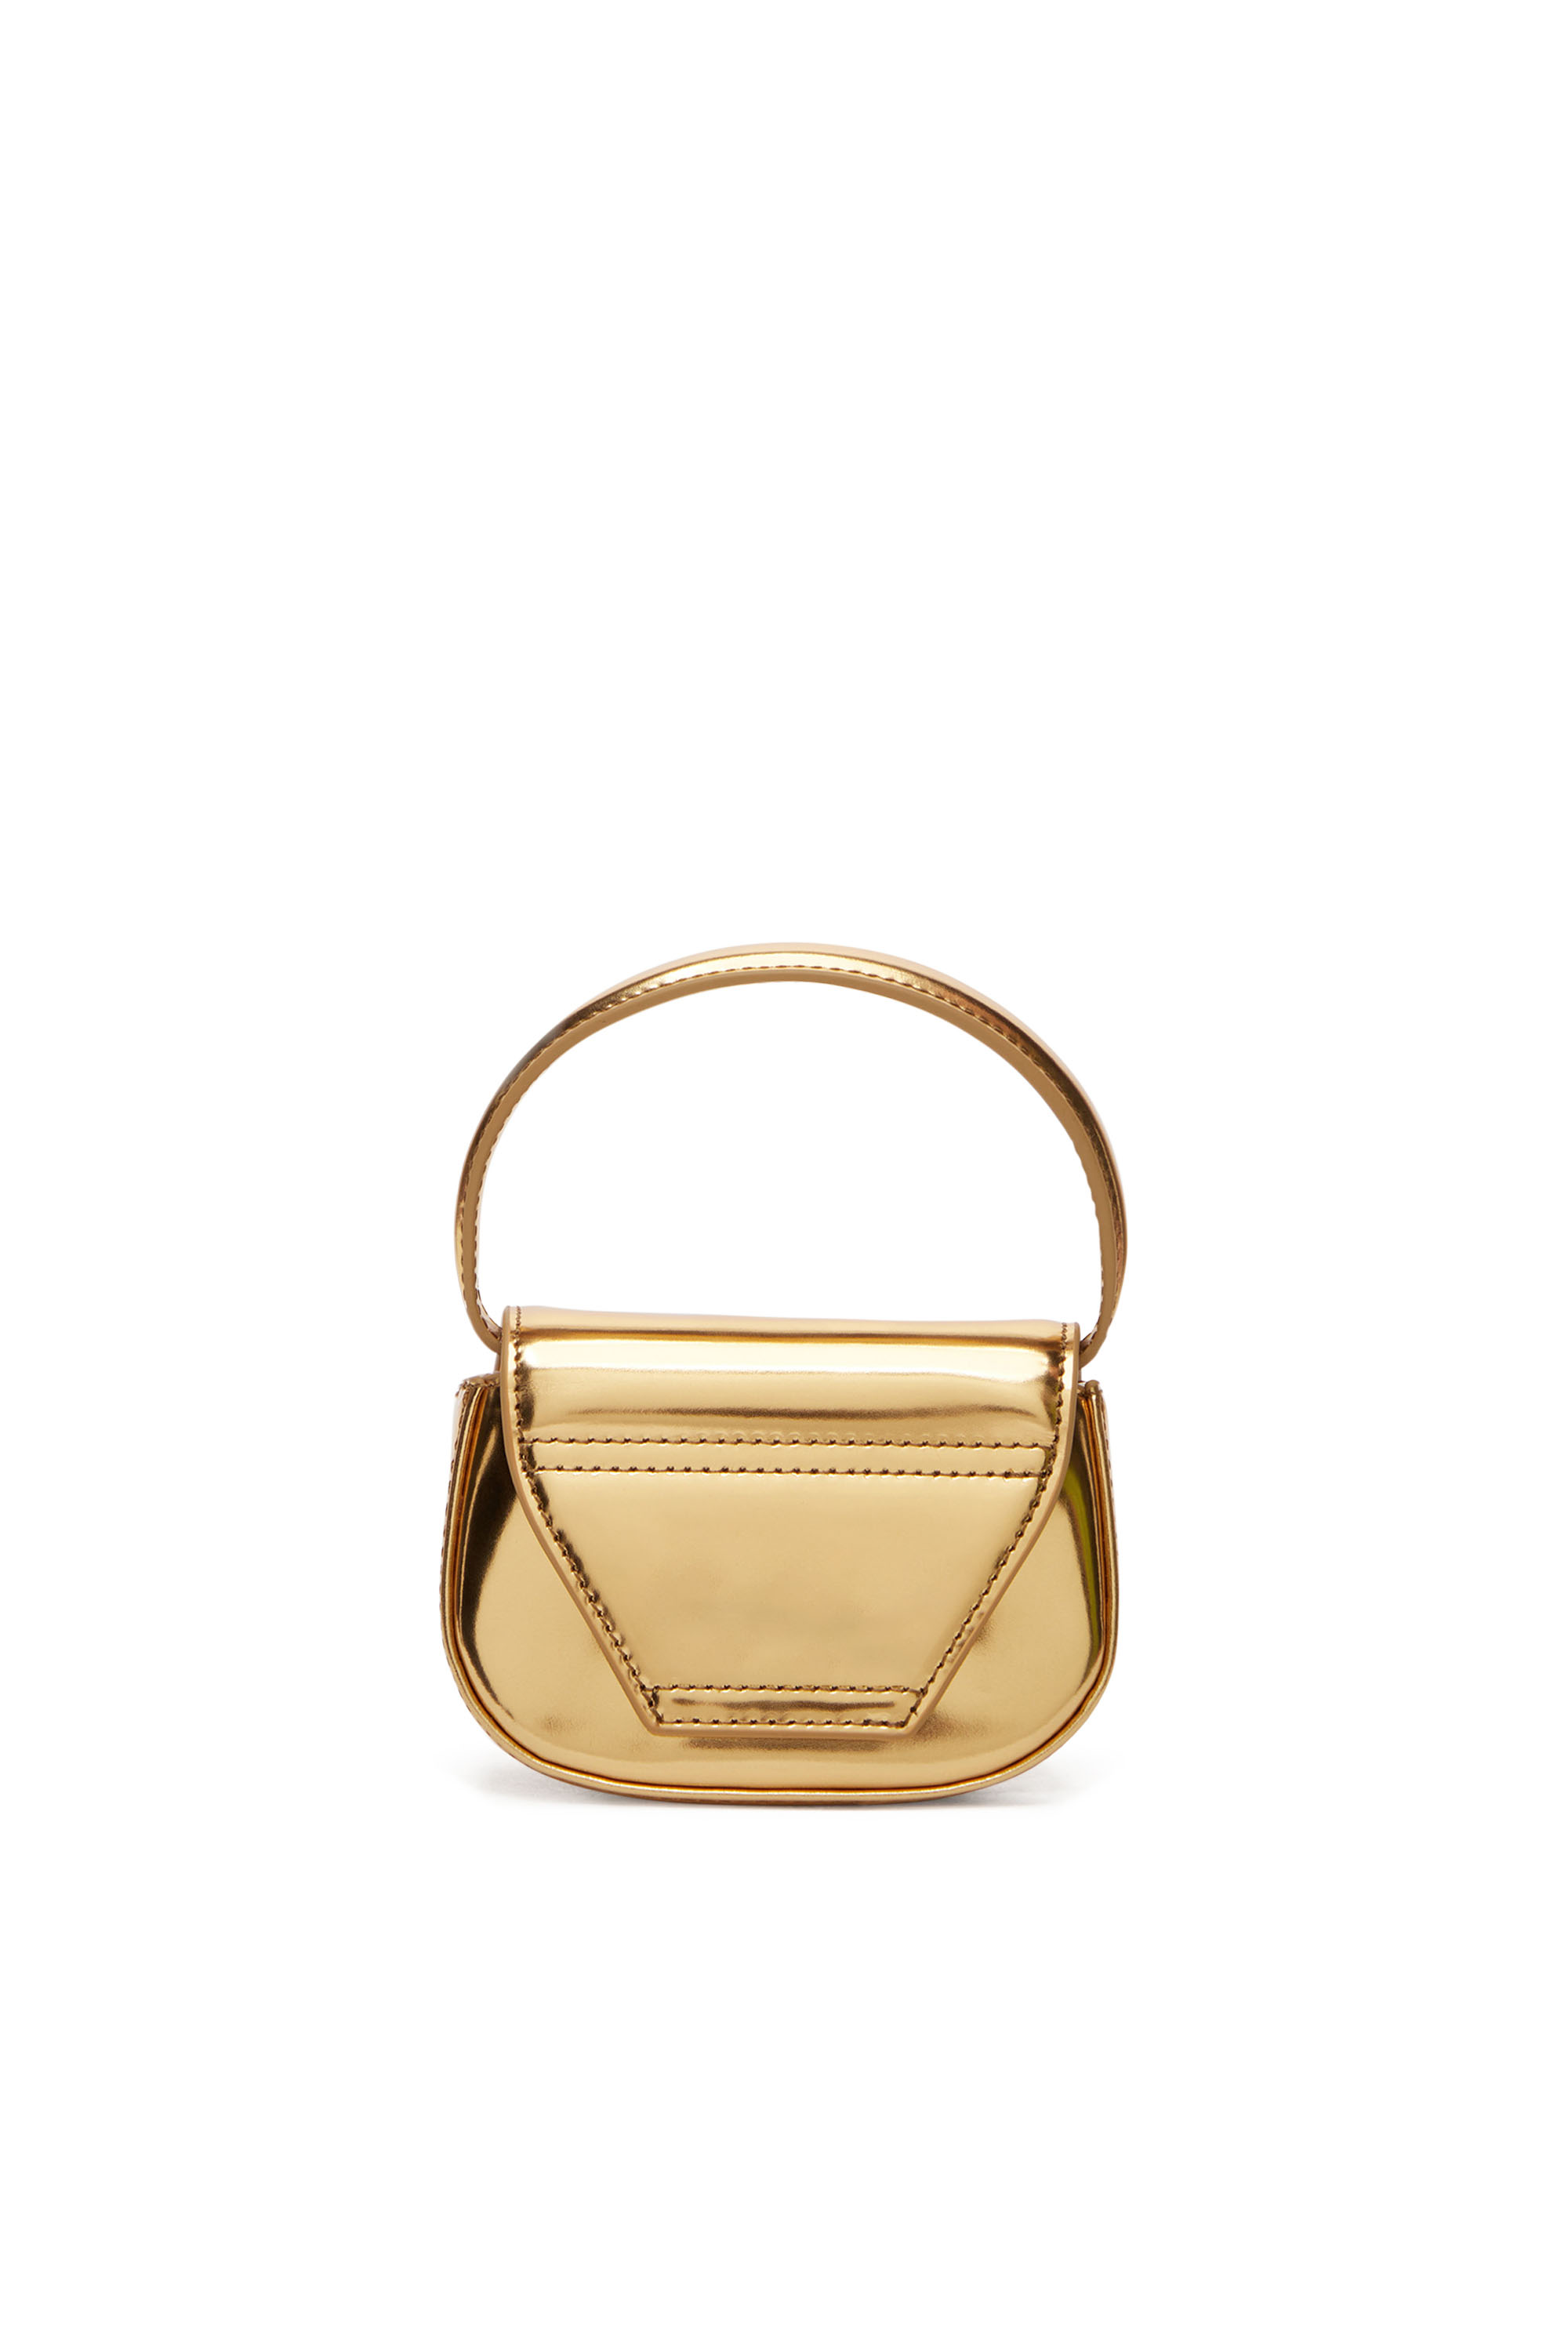 Diesel - 1DR-XS-S, Woman 1DR-XS-S-Iconic mini bag in mirrored leather in Oro - Image 2